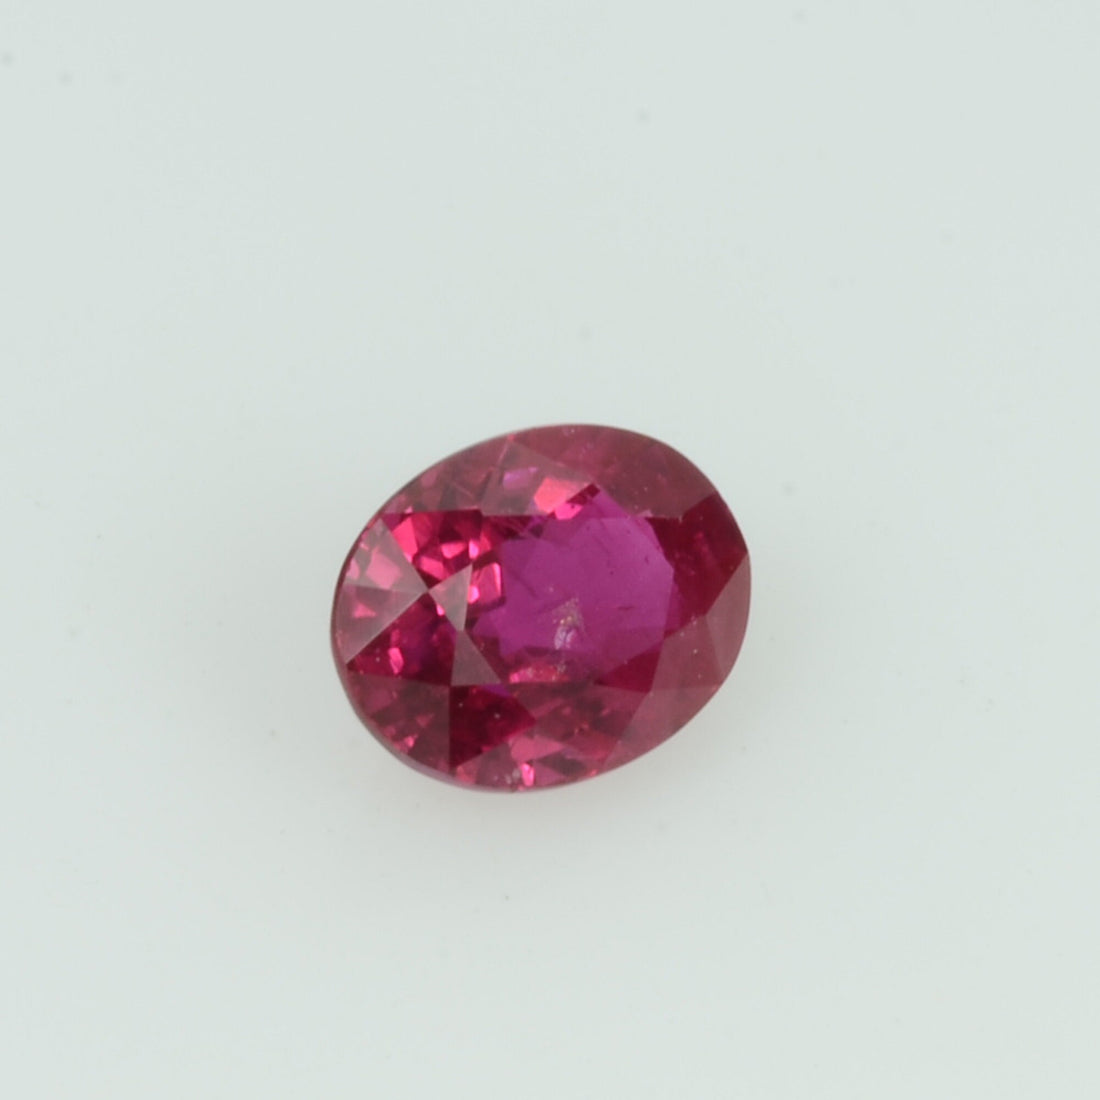 0.41 Cts Natural Vietnam Ruby Loose Gemstone Oval Cut